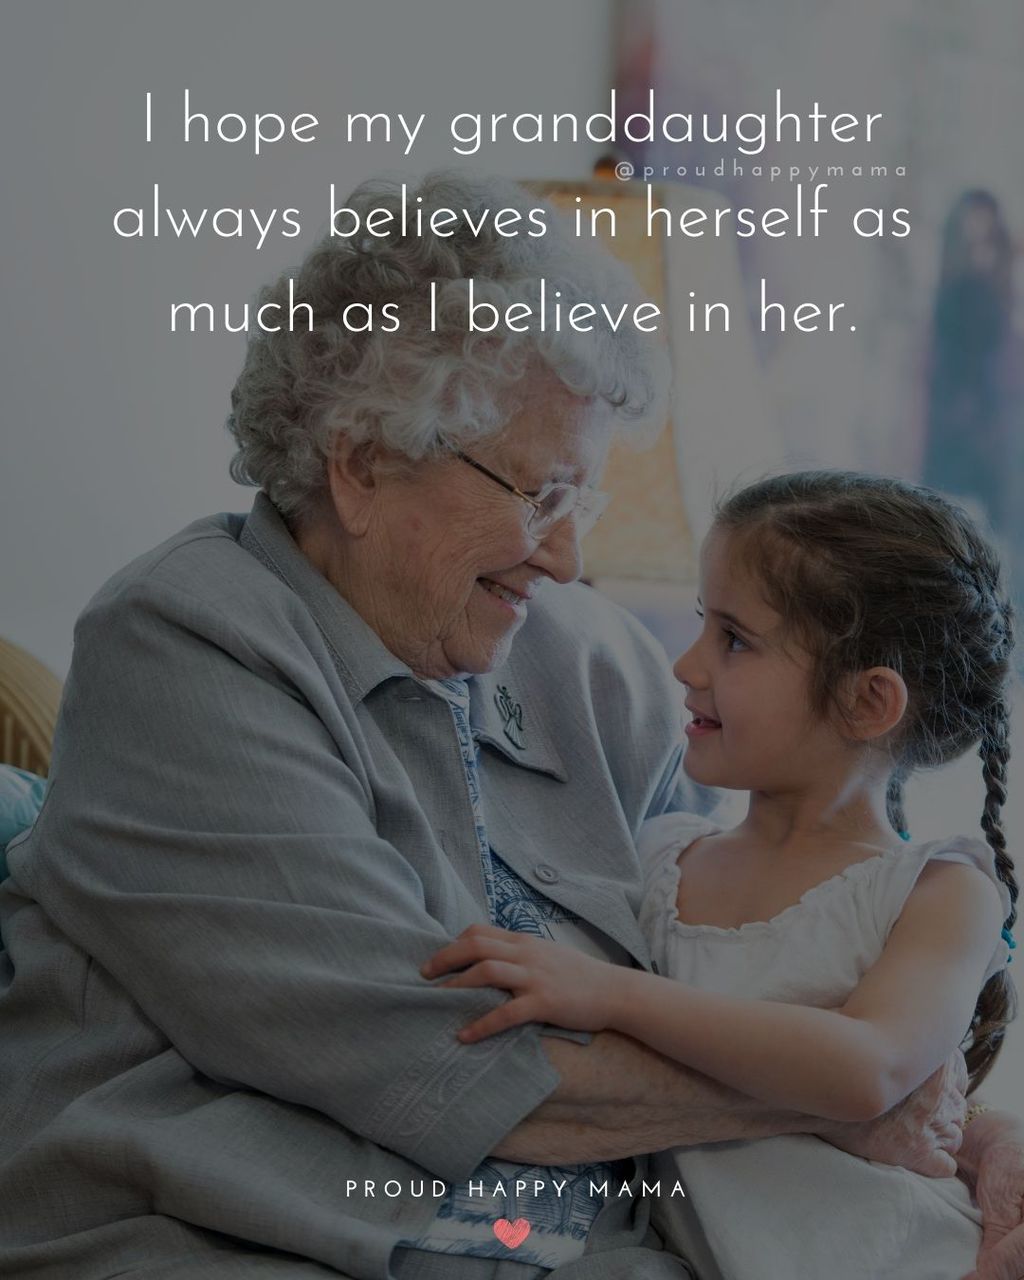 Grandmother looking loving at granddaughter while her granddaughter is sitting in her lap. With text overlay, ‘I hope my granddaughter always believes in herself as much as I believe in her.’